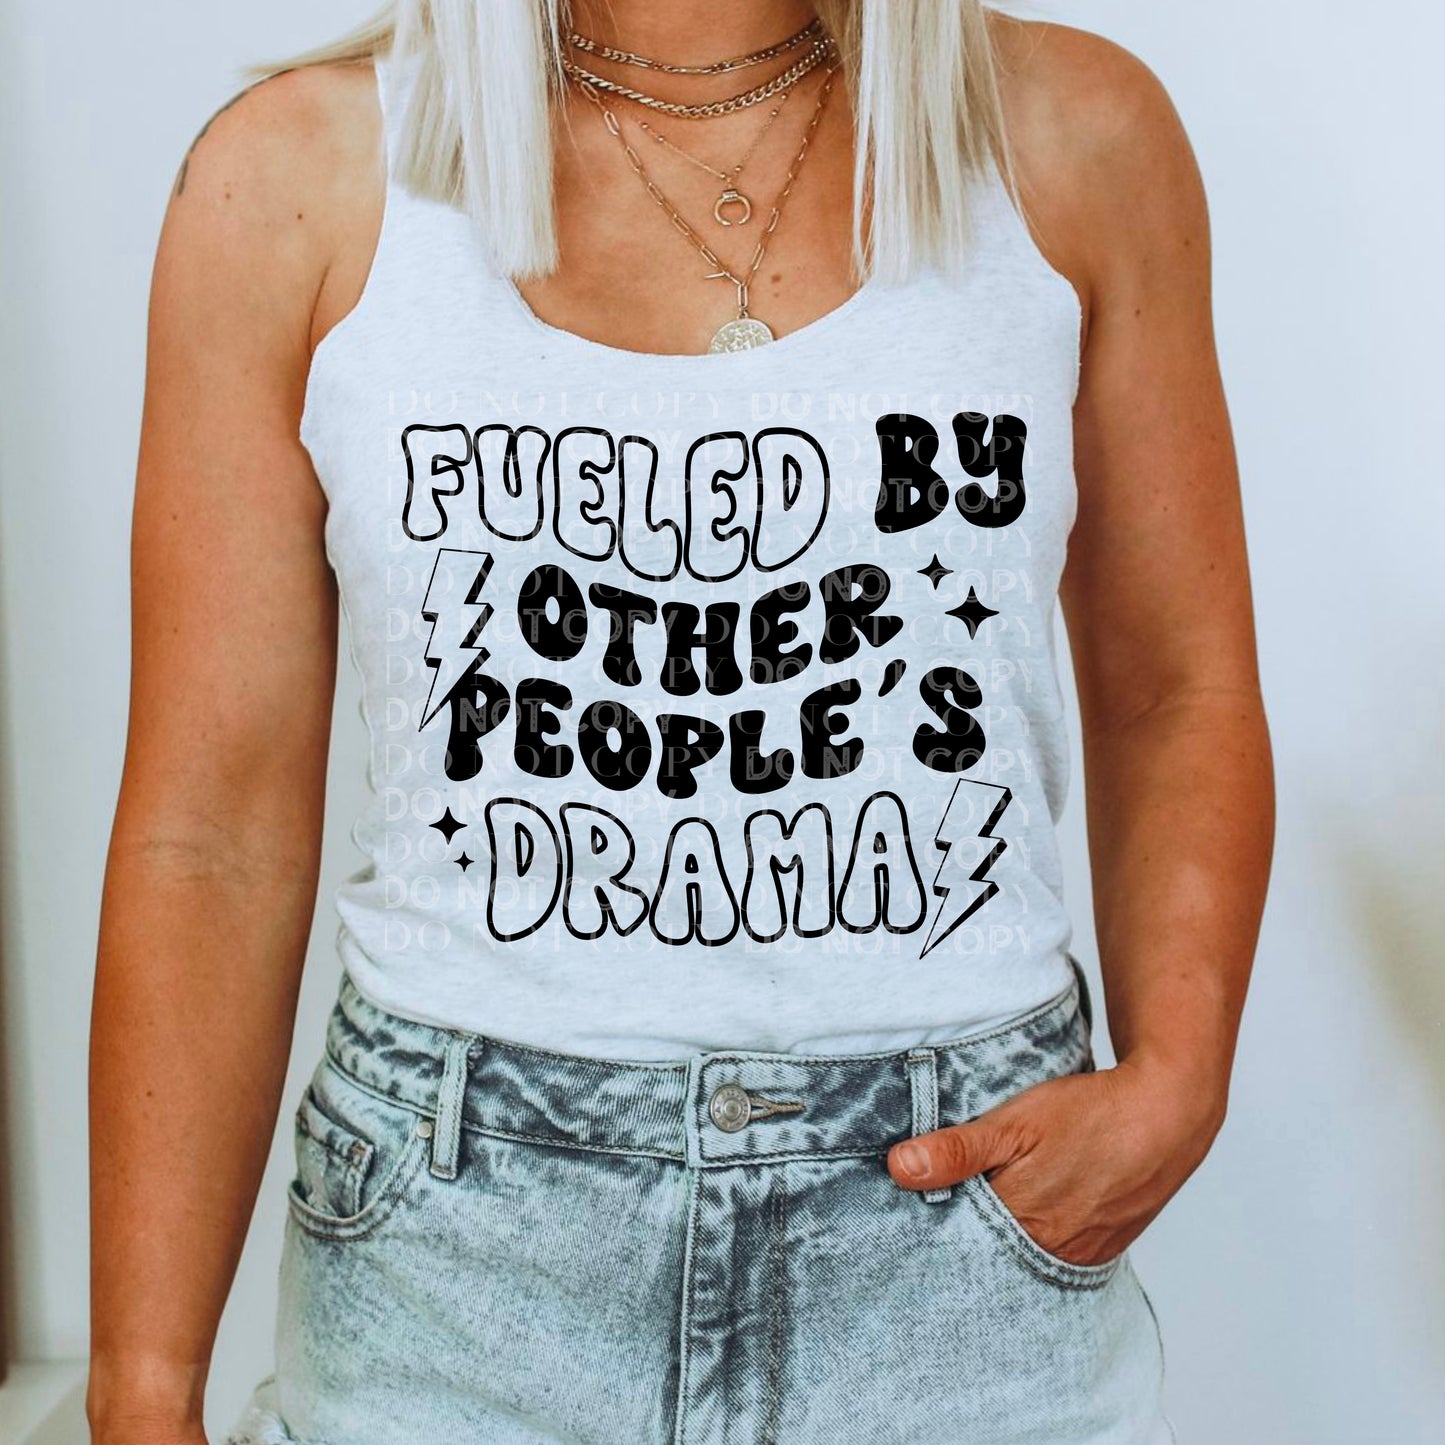 Fueled by other people's Drama V2DTF PRINT